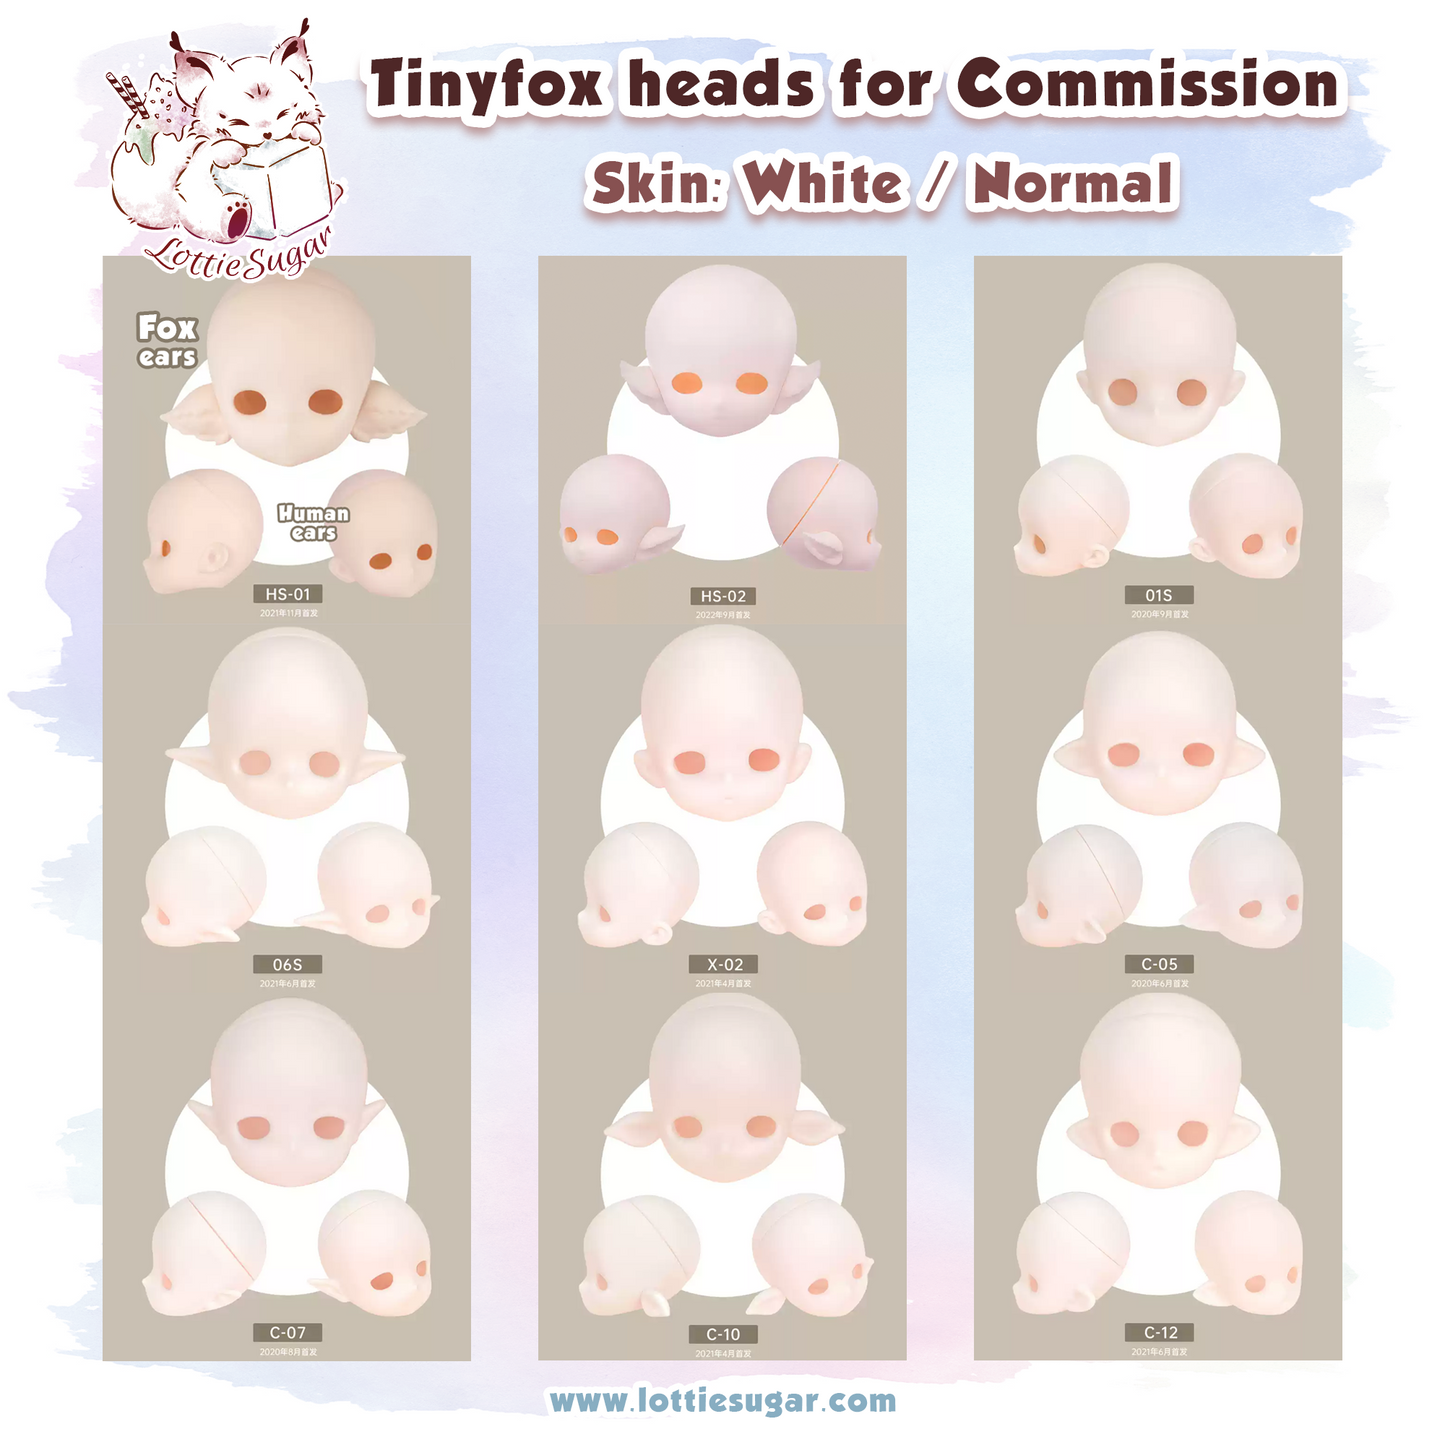 About Face-up Commission